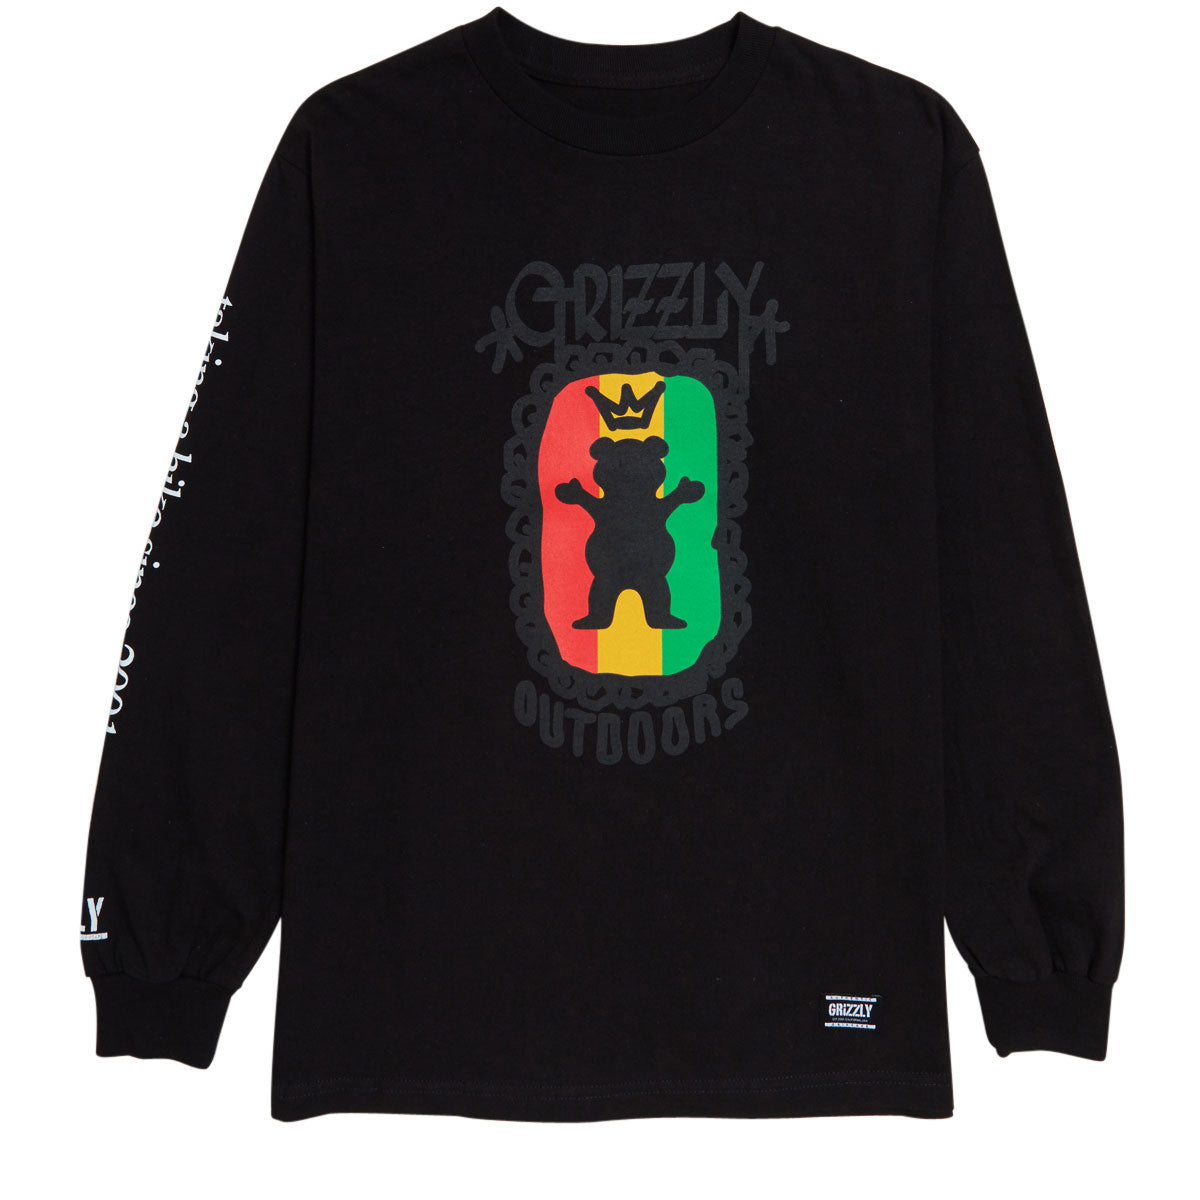 Grizzly Most High Long Sleeve T-Shirt - Black image 1